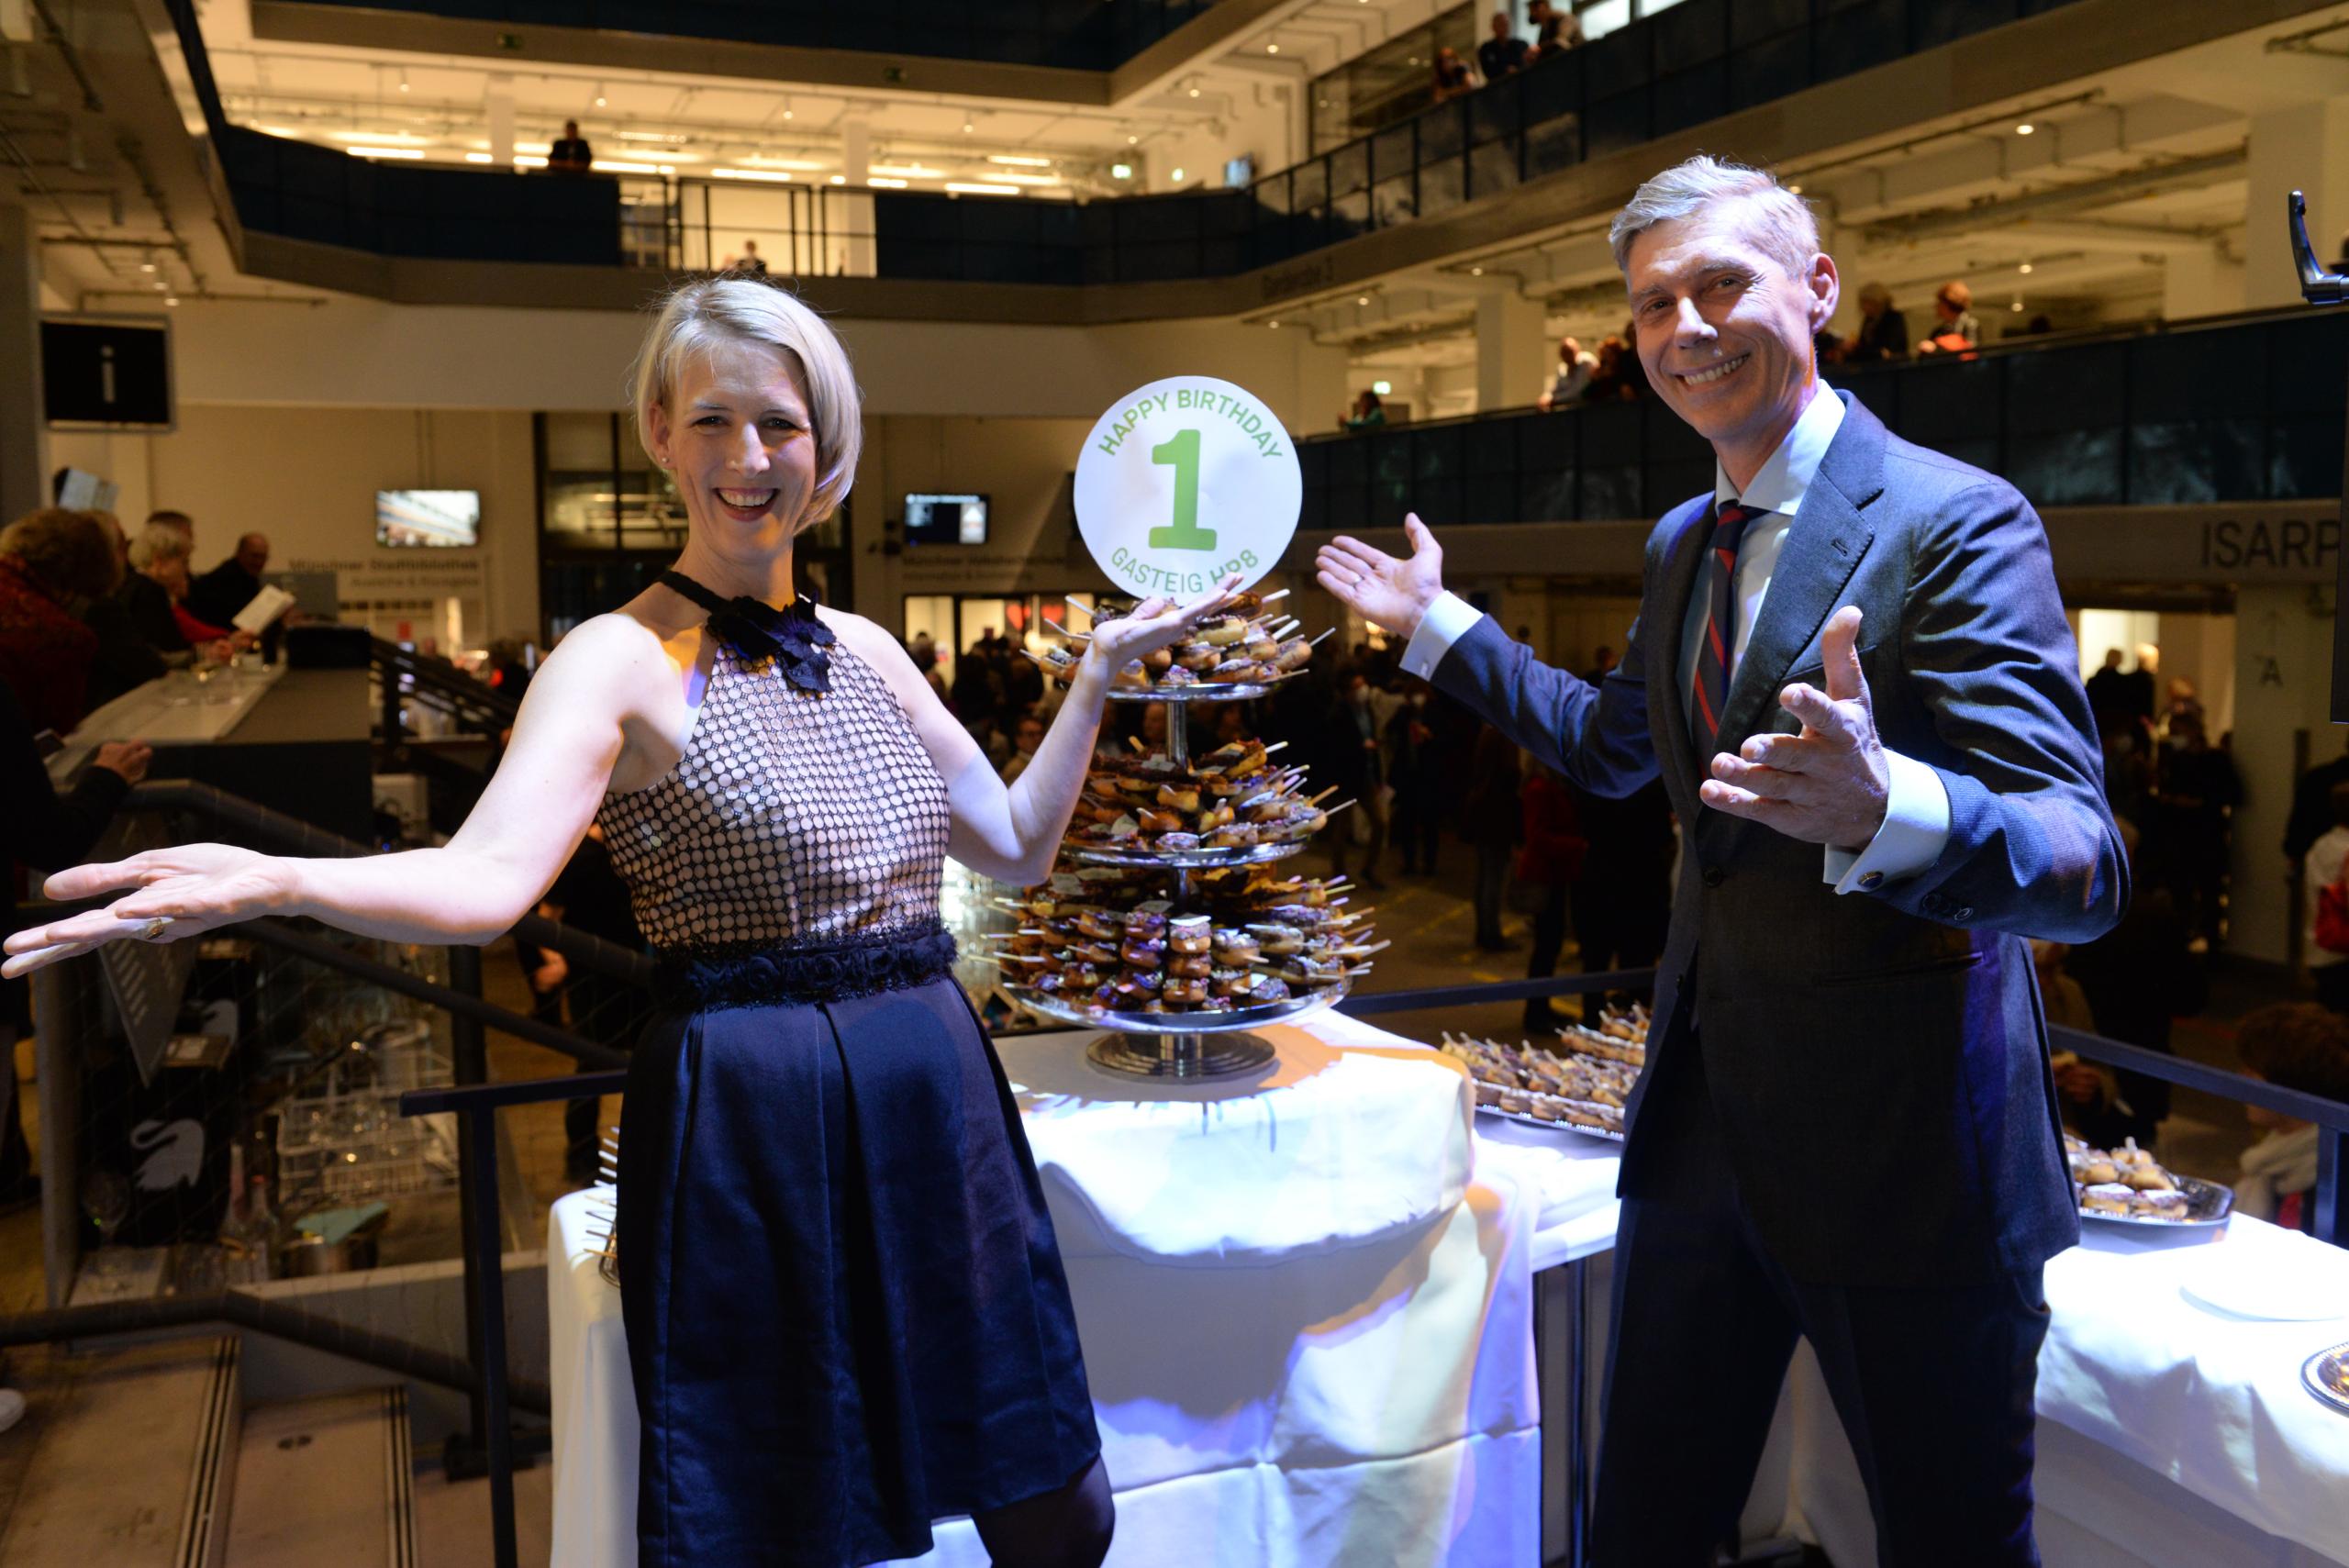 Katrin Habenschaden and Max Wagner stand smiling in front of a cake setup.